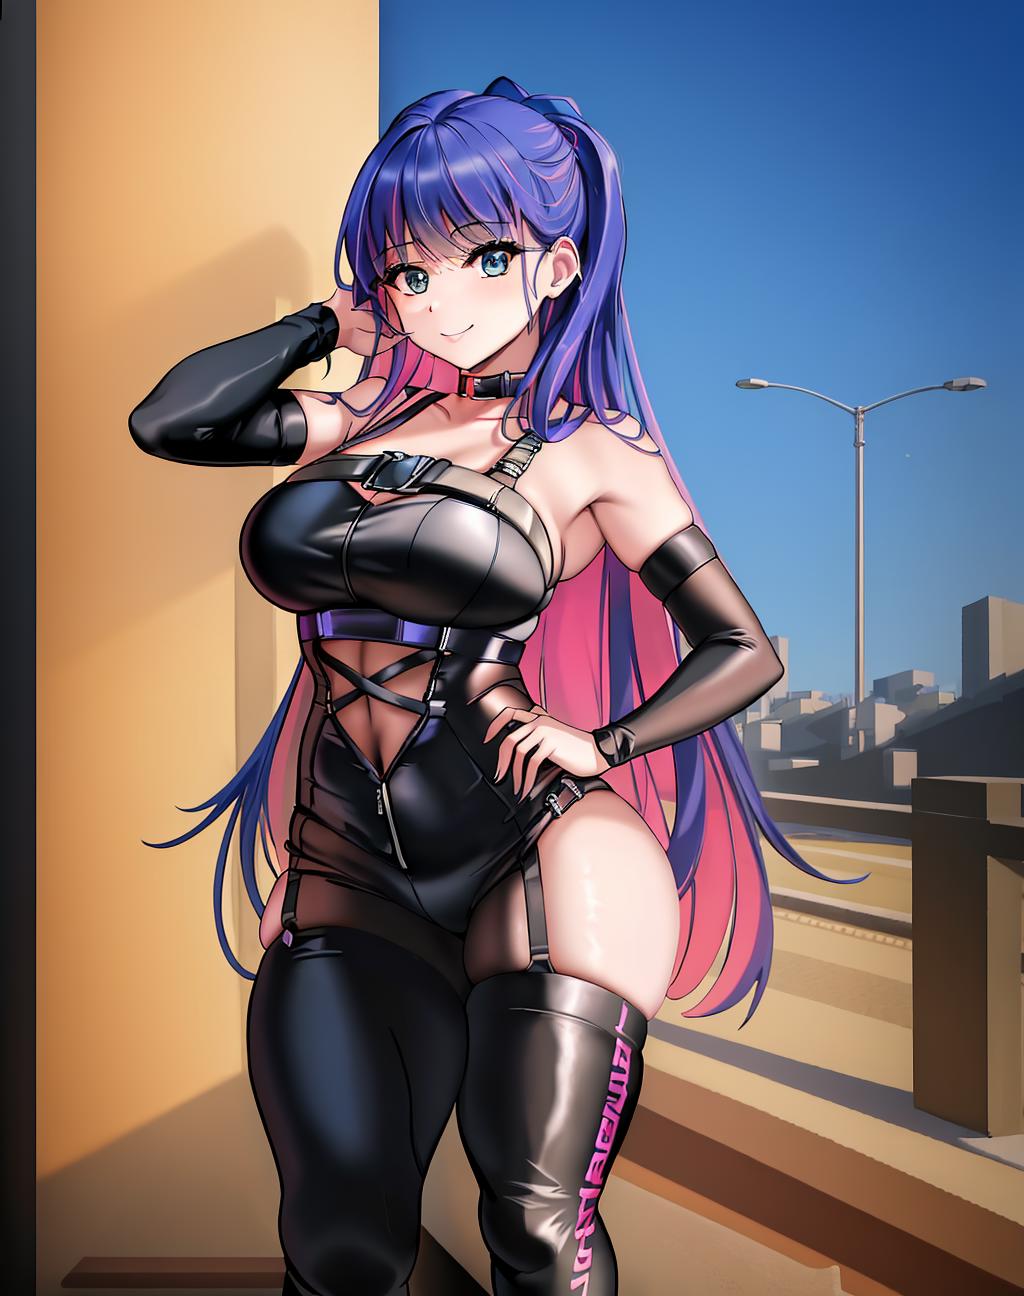 Anarchy Stocking - Panty & Stocking With Garterbelt (Character) image by EDG